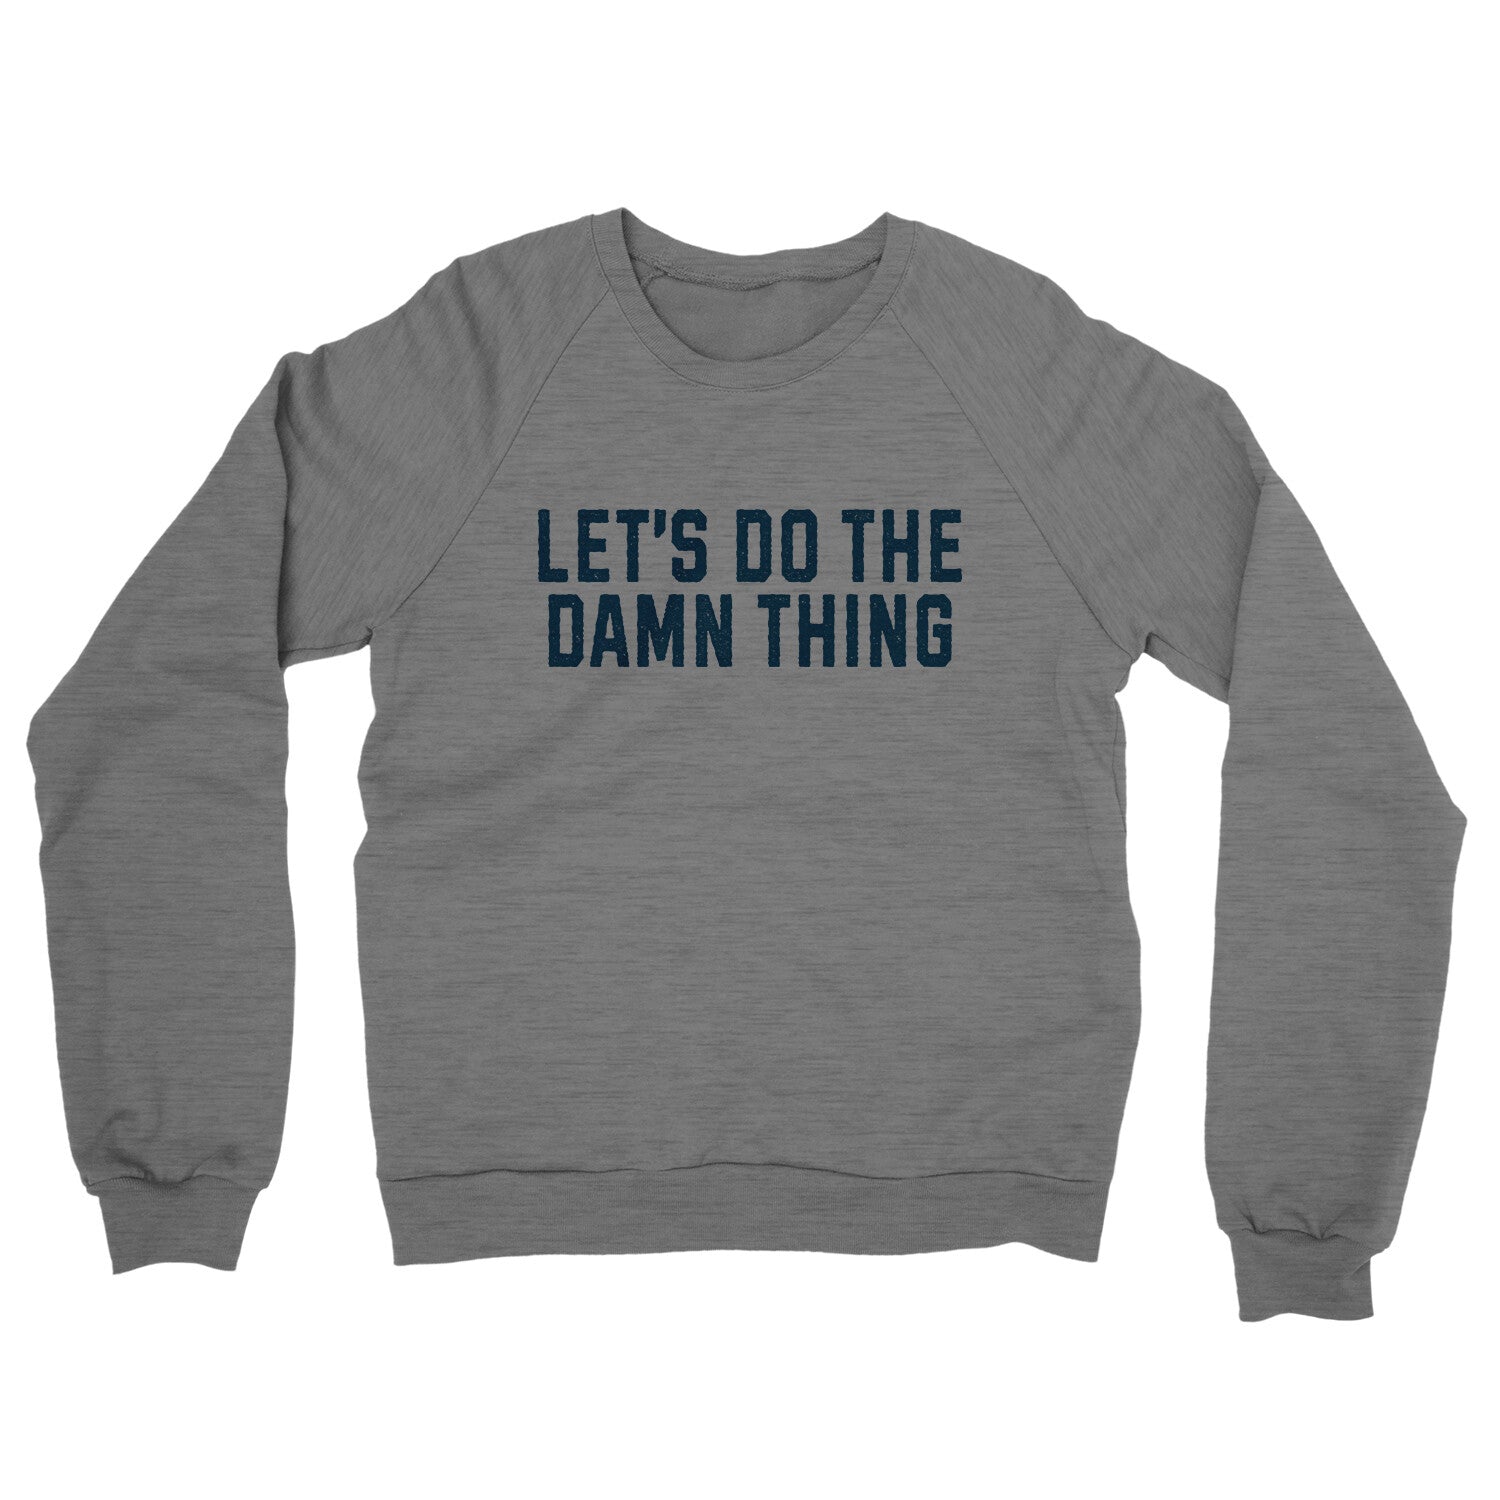 Let’s Do the Damn Thing in Graphite Heather Color